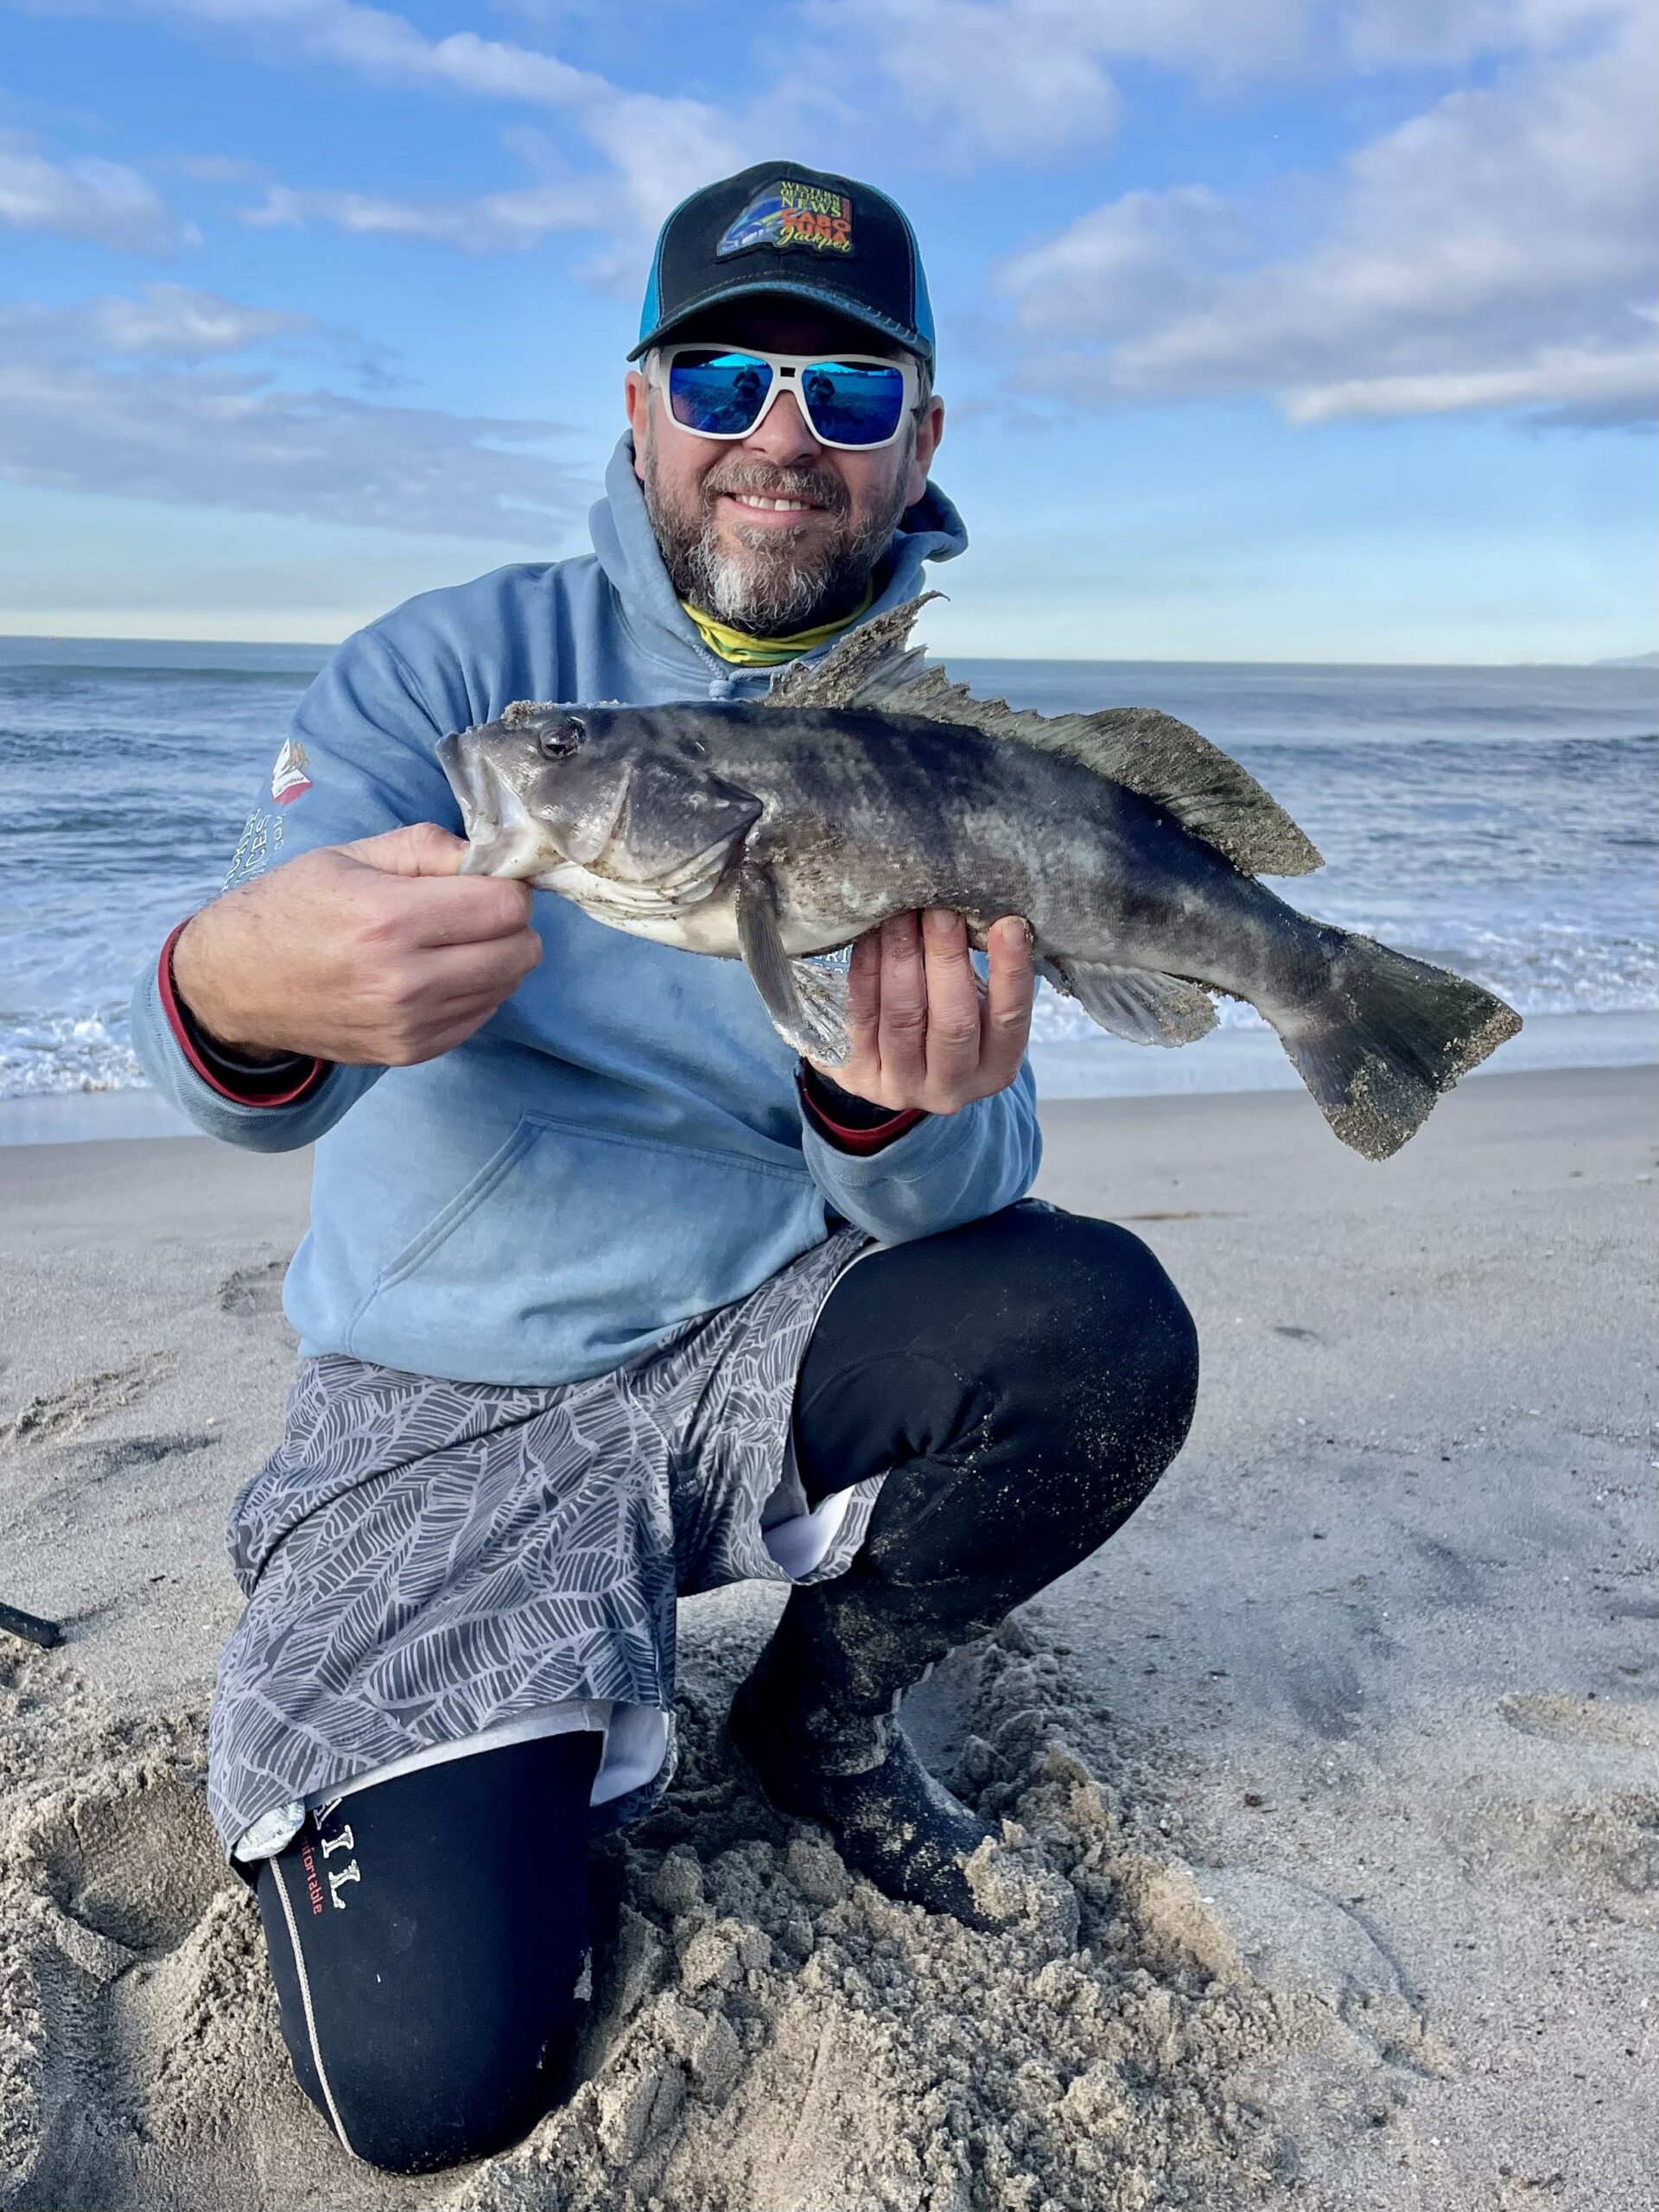 Surf fishing – Baits, locations, tackle and tactics for cold-water